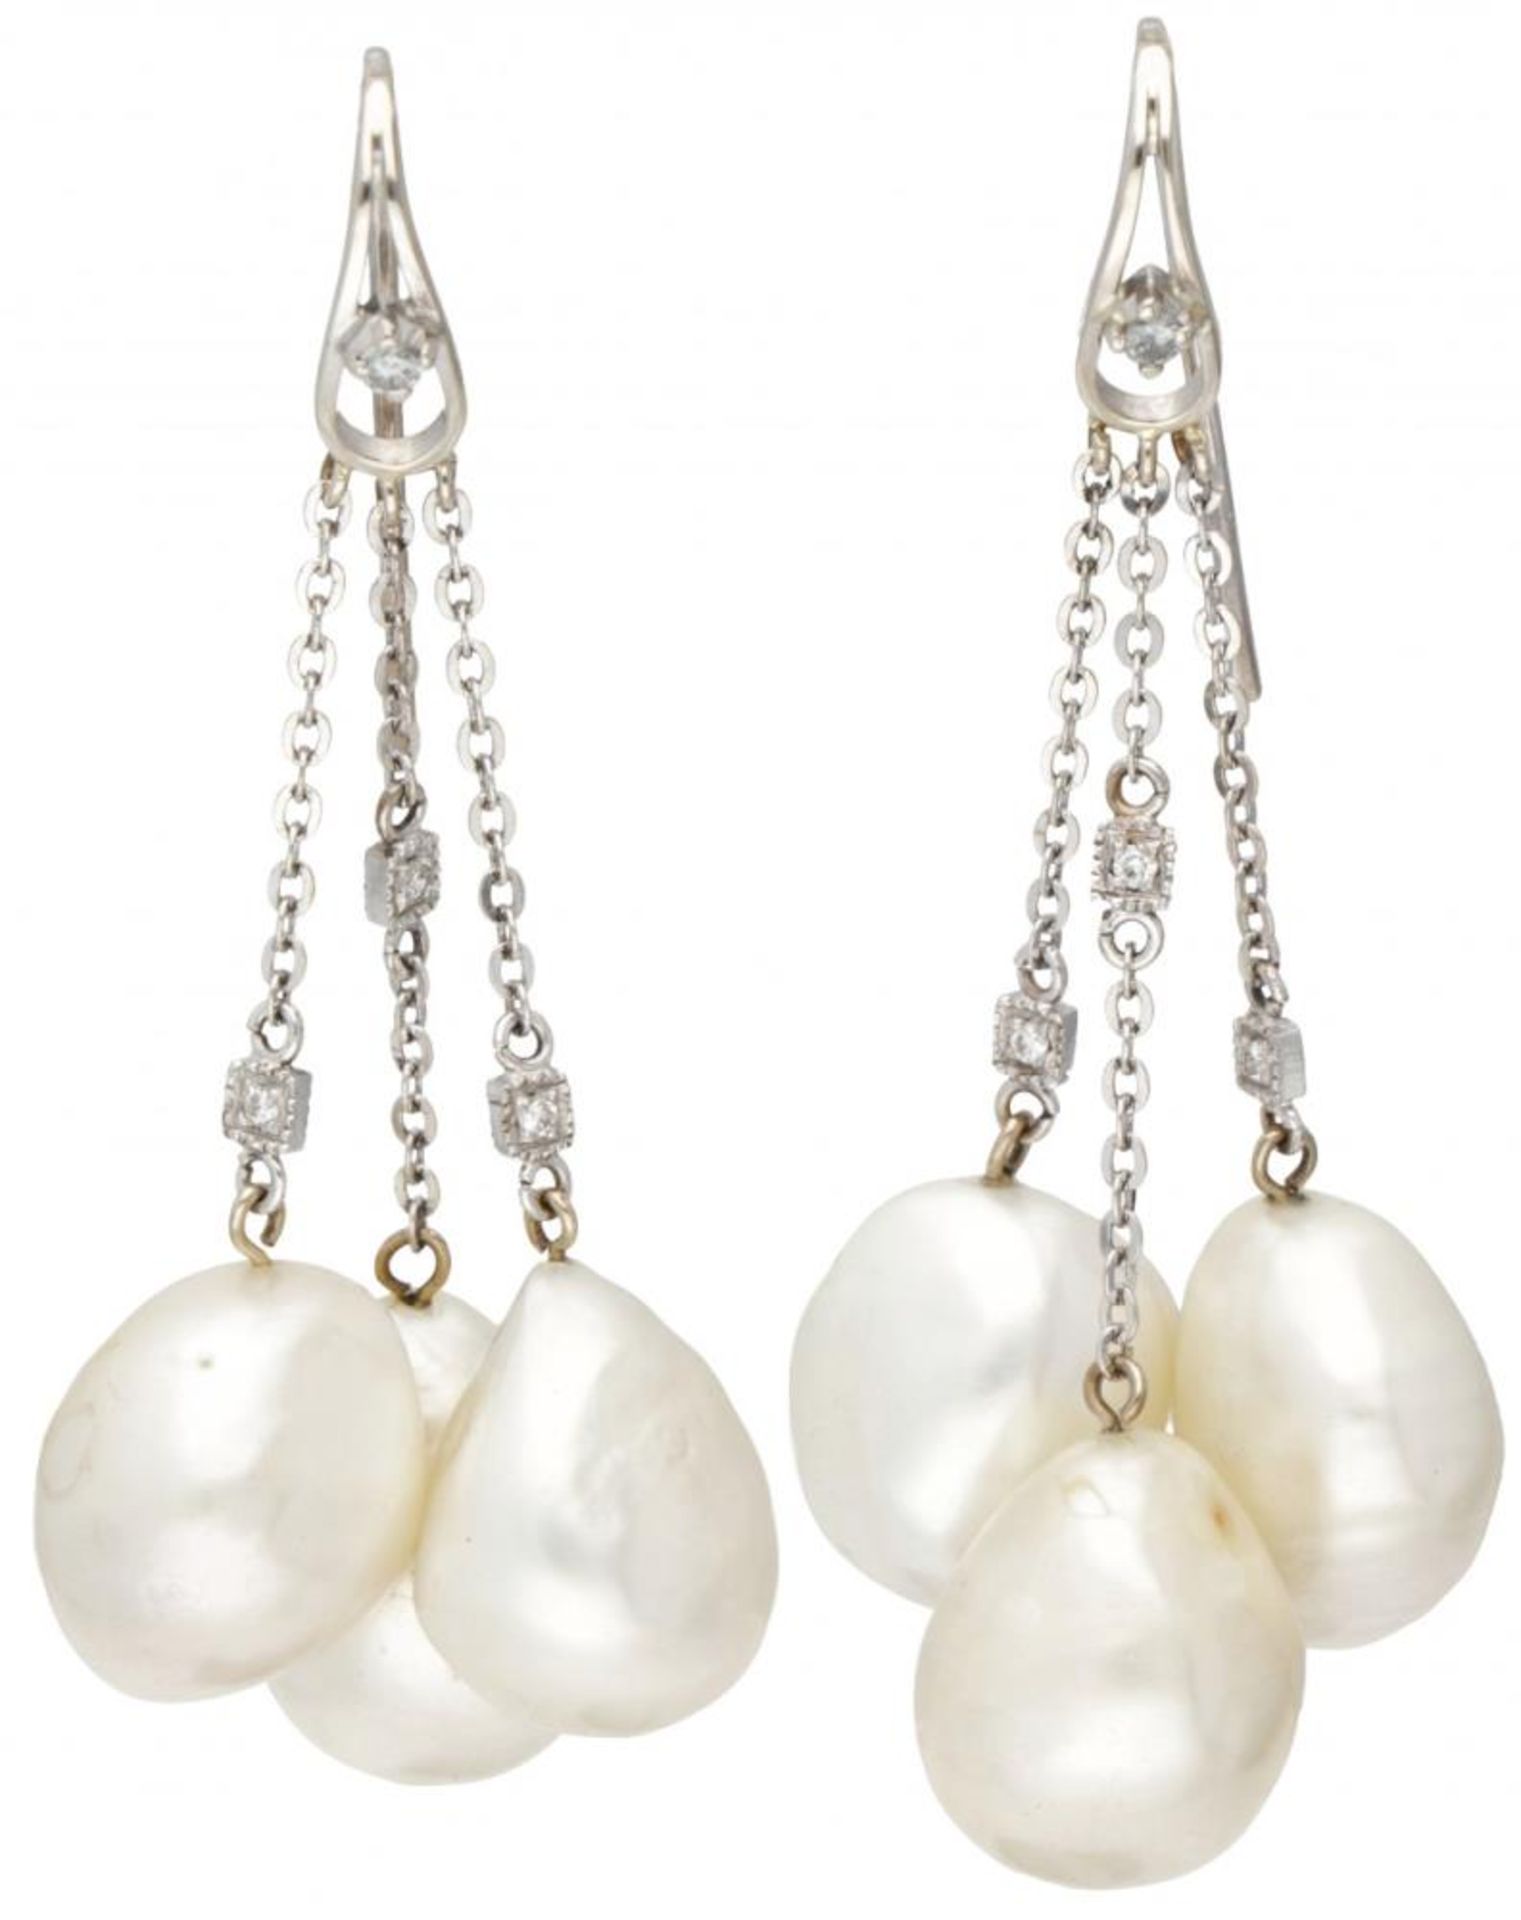 18K. White gold earrings each with three strands, approx. 0.10 ct. diamond and freshwater pearls.